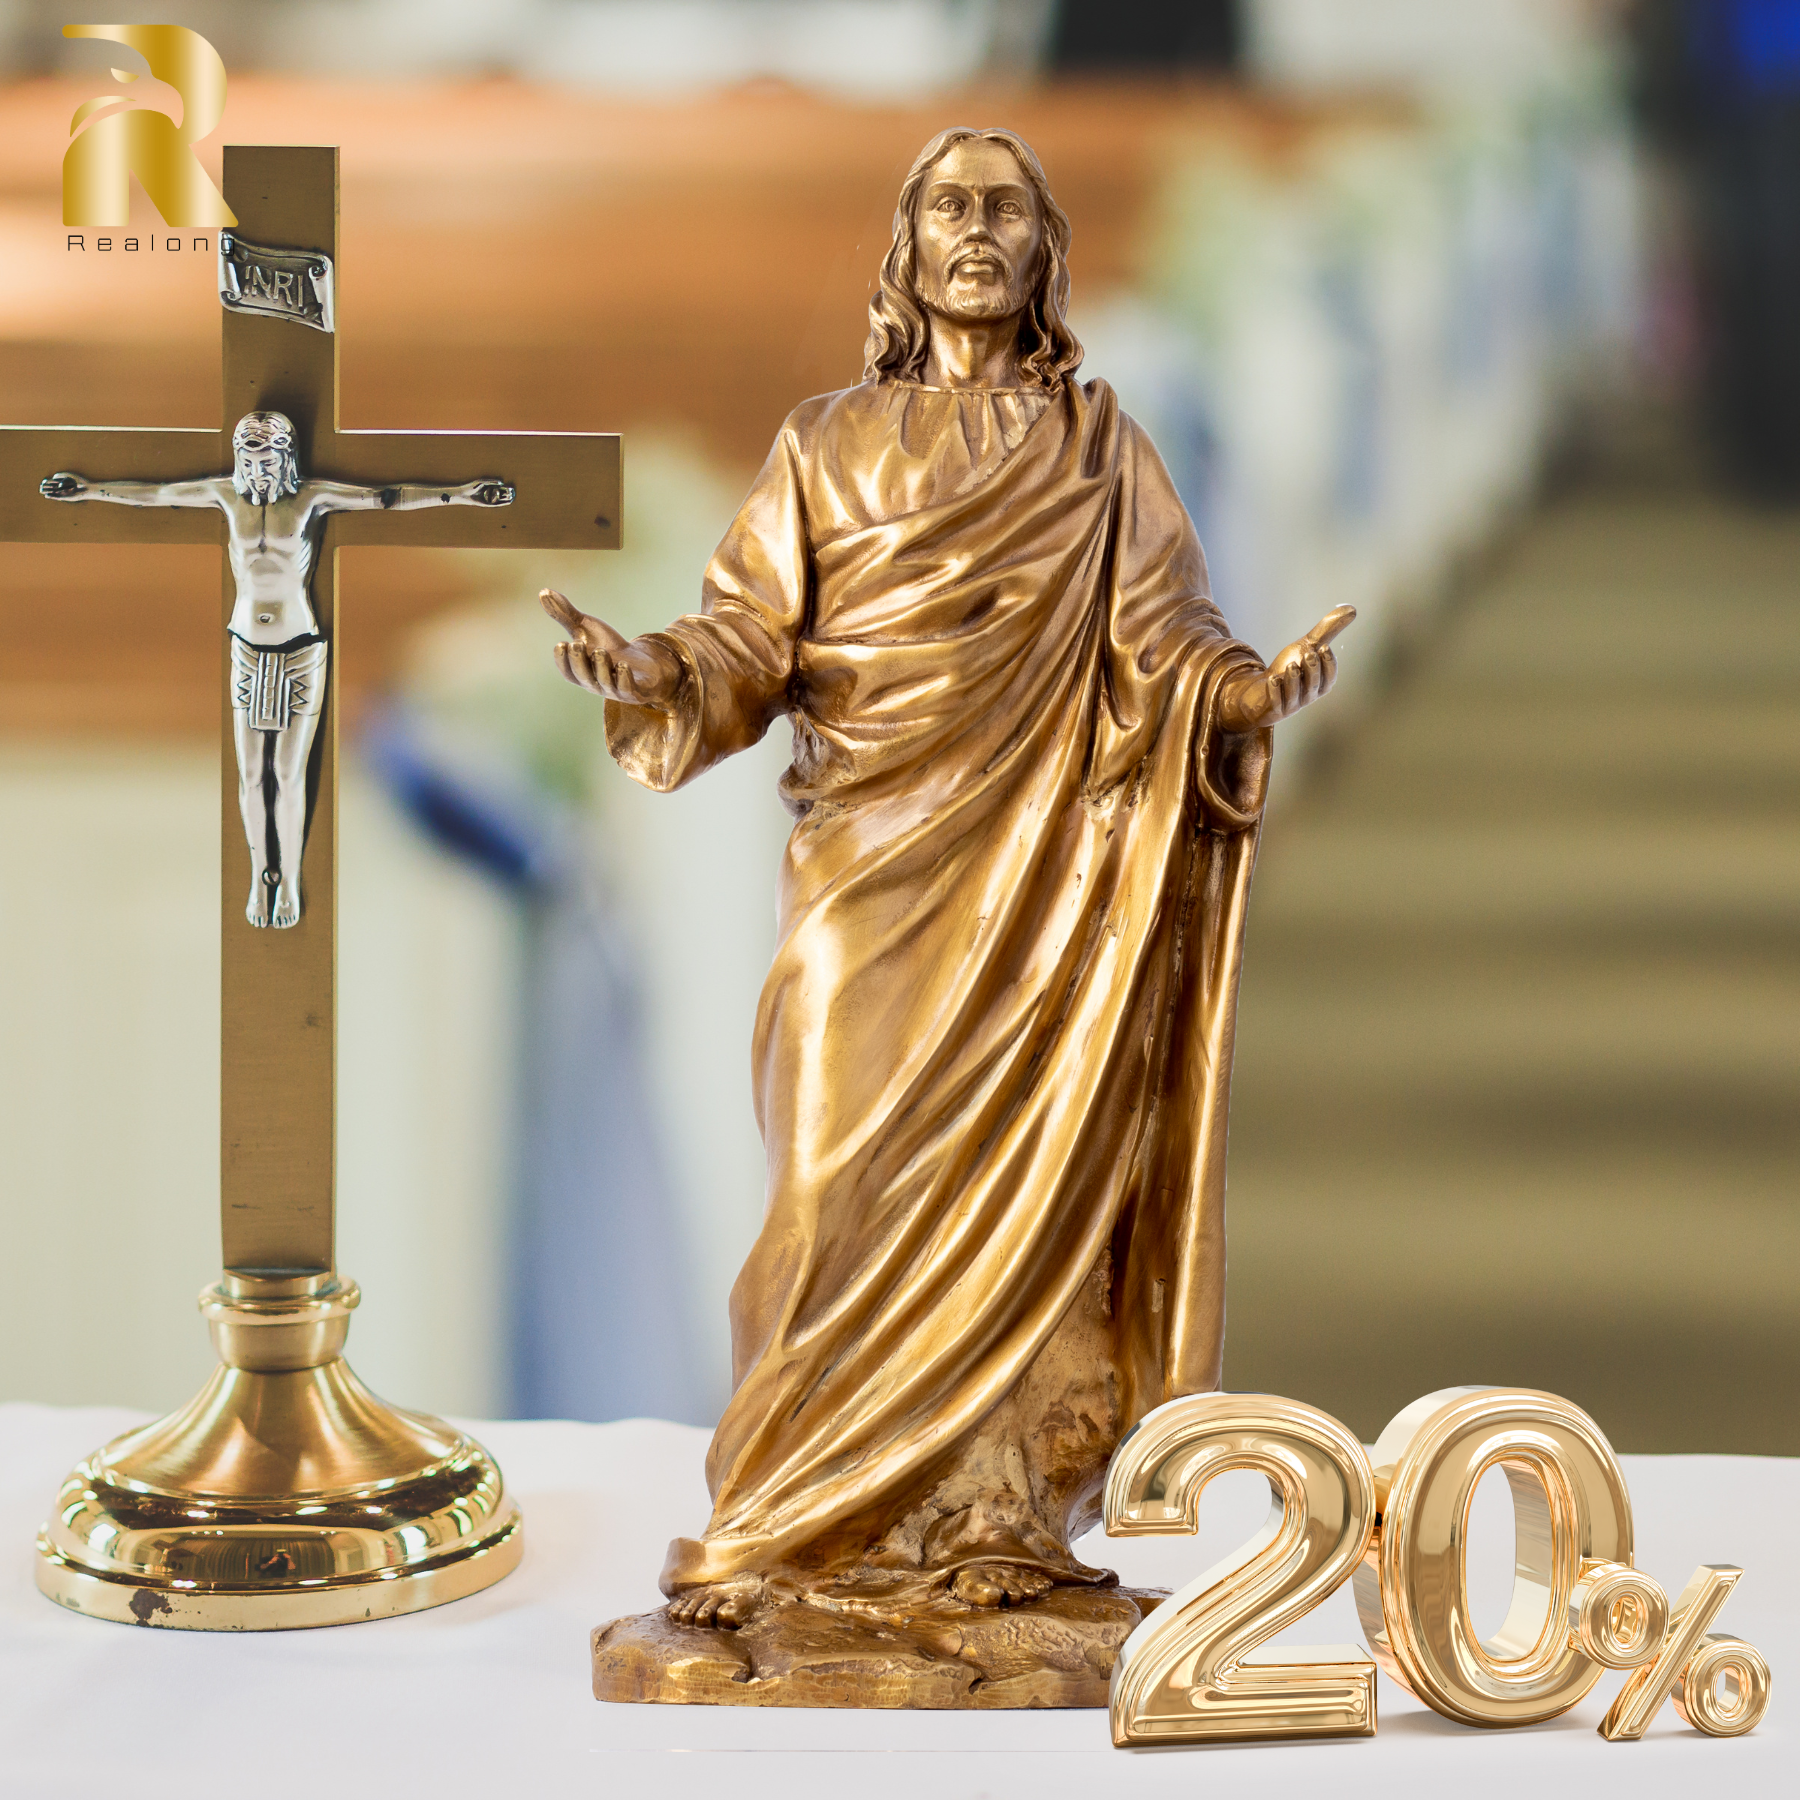 12.2''/31cm Gold Bronze Jesus Statue, Brass Religious The Lord SaviorSon of God Sacred Christian Figurine Sculptures Art for Home Office Decor Gift.